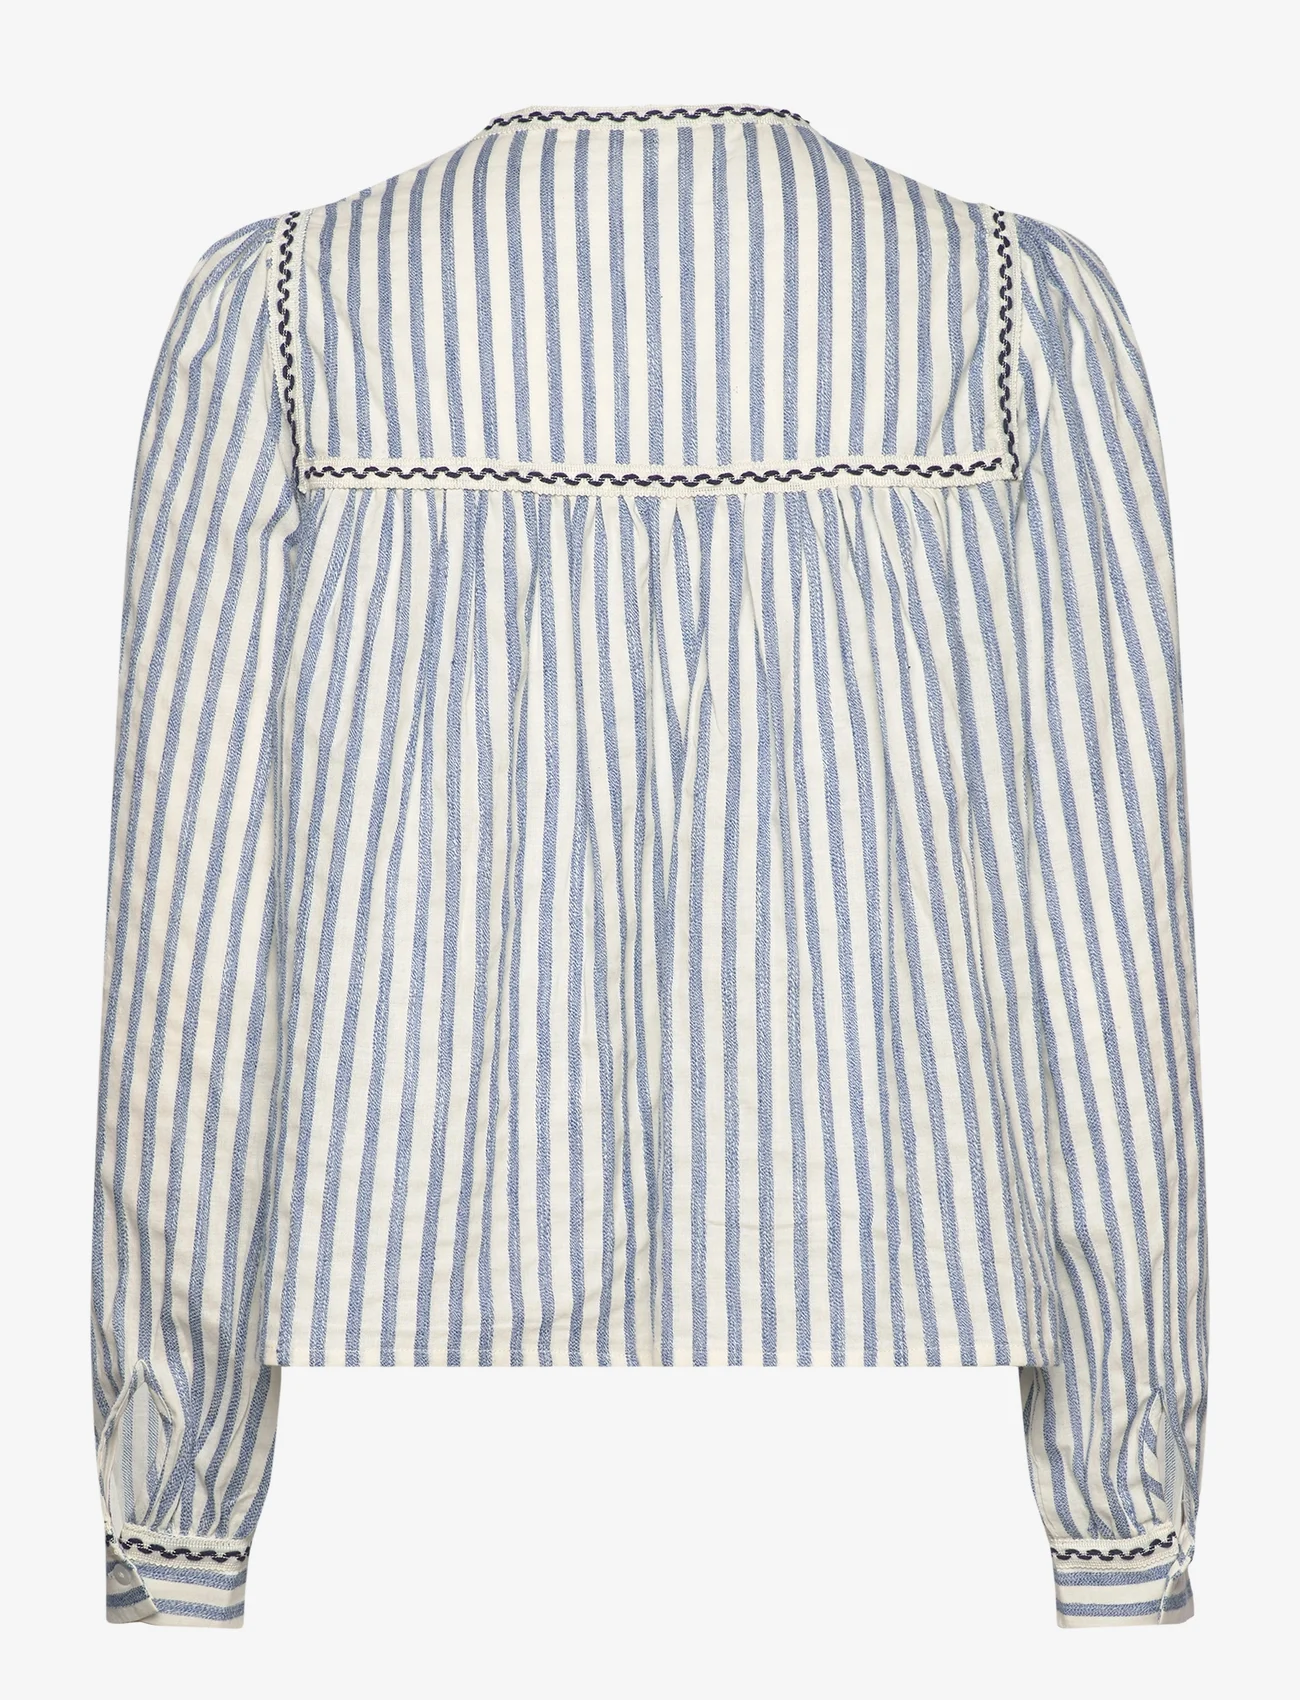 Sofie Schnoor - Shirt - long-sleeved shirts - federal blue - 1